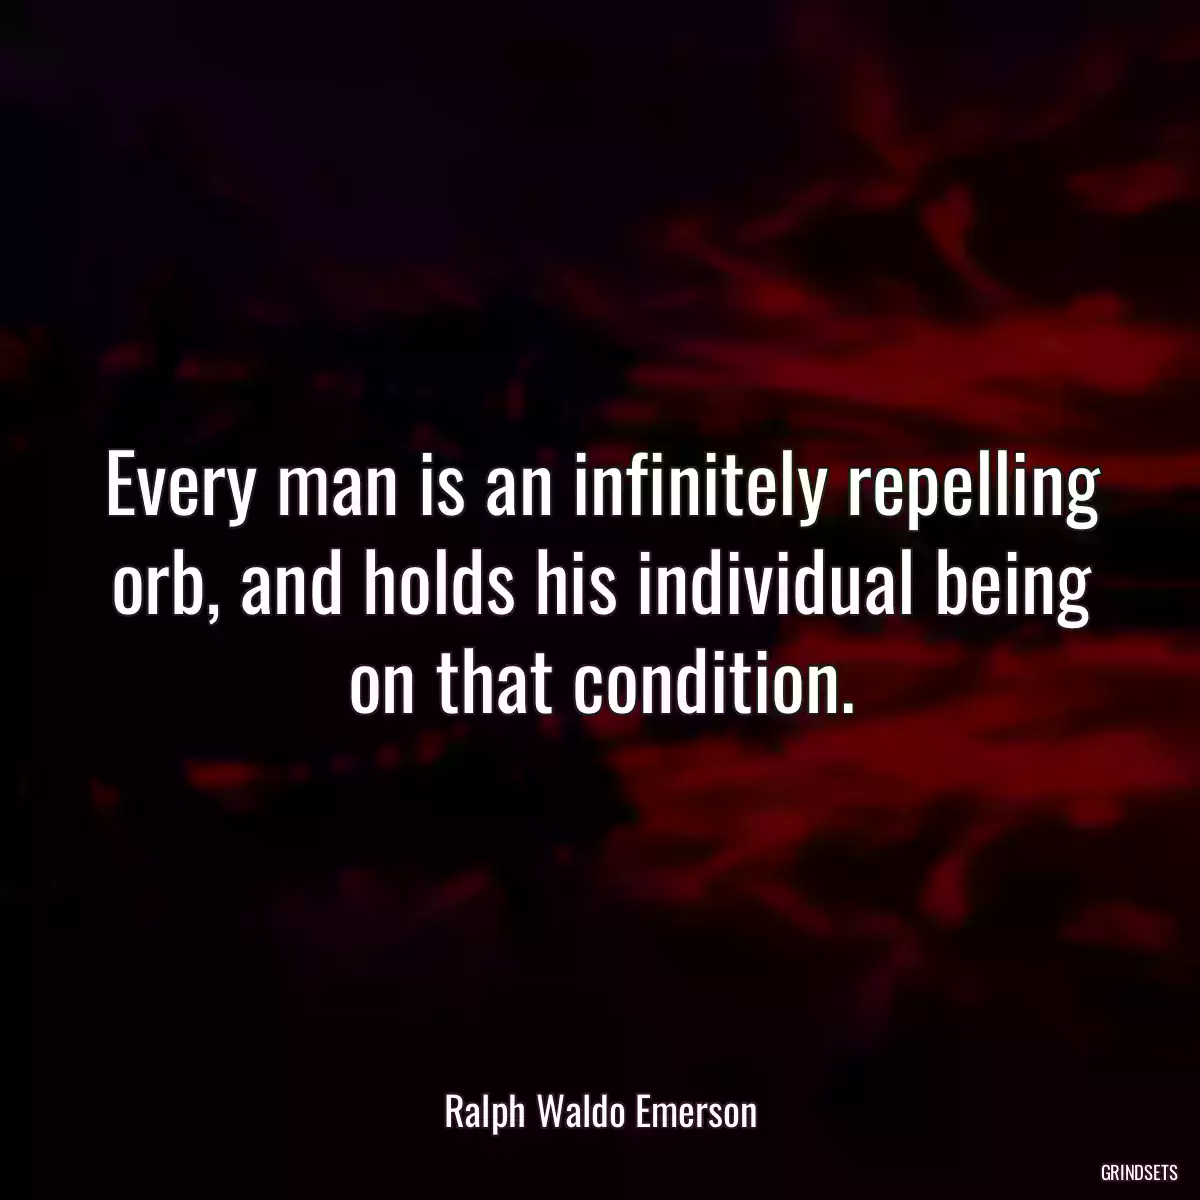 Every man is an infinitely repelling orb, and holds his individual being on that condition.